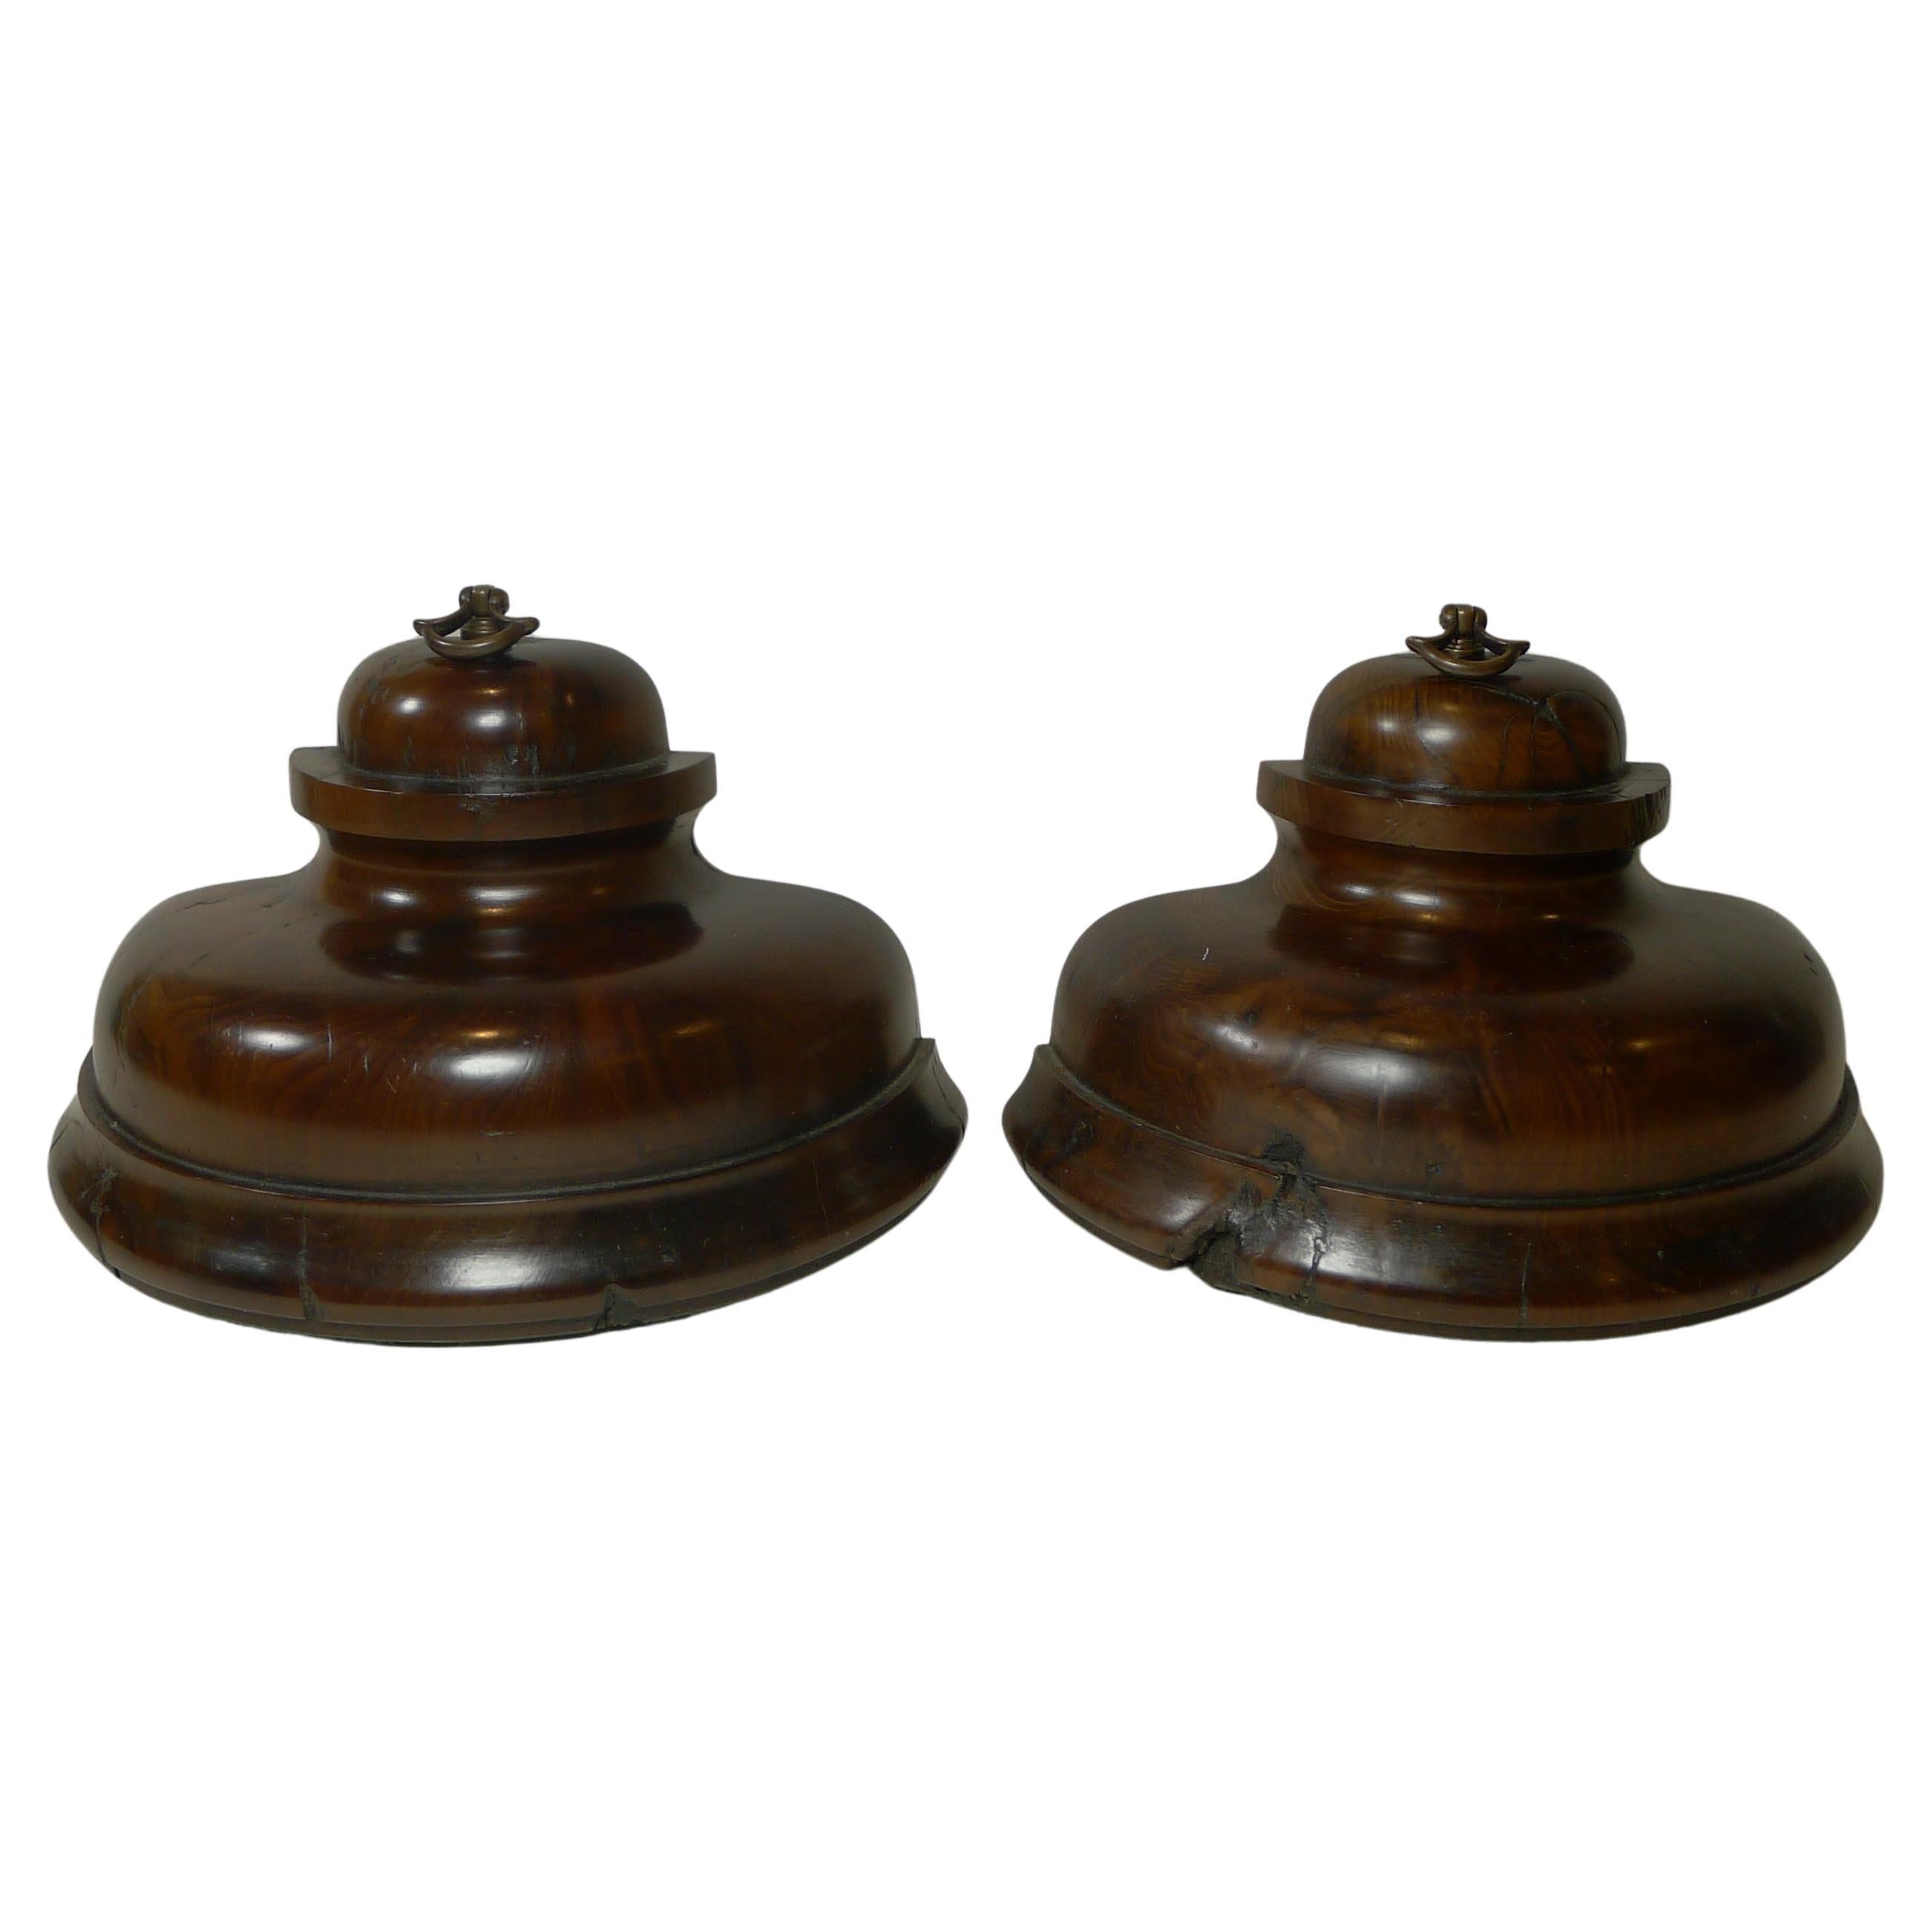 Unusual Pair Georgian Solid Yew Wood Bookends c.1800 For Sale